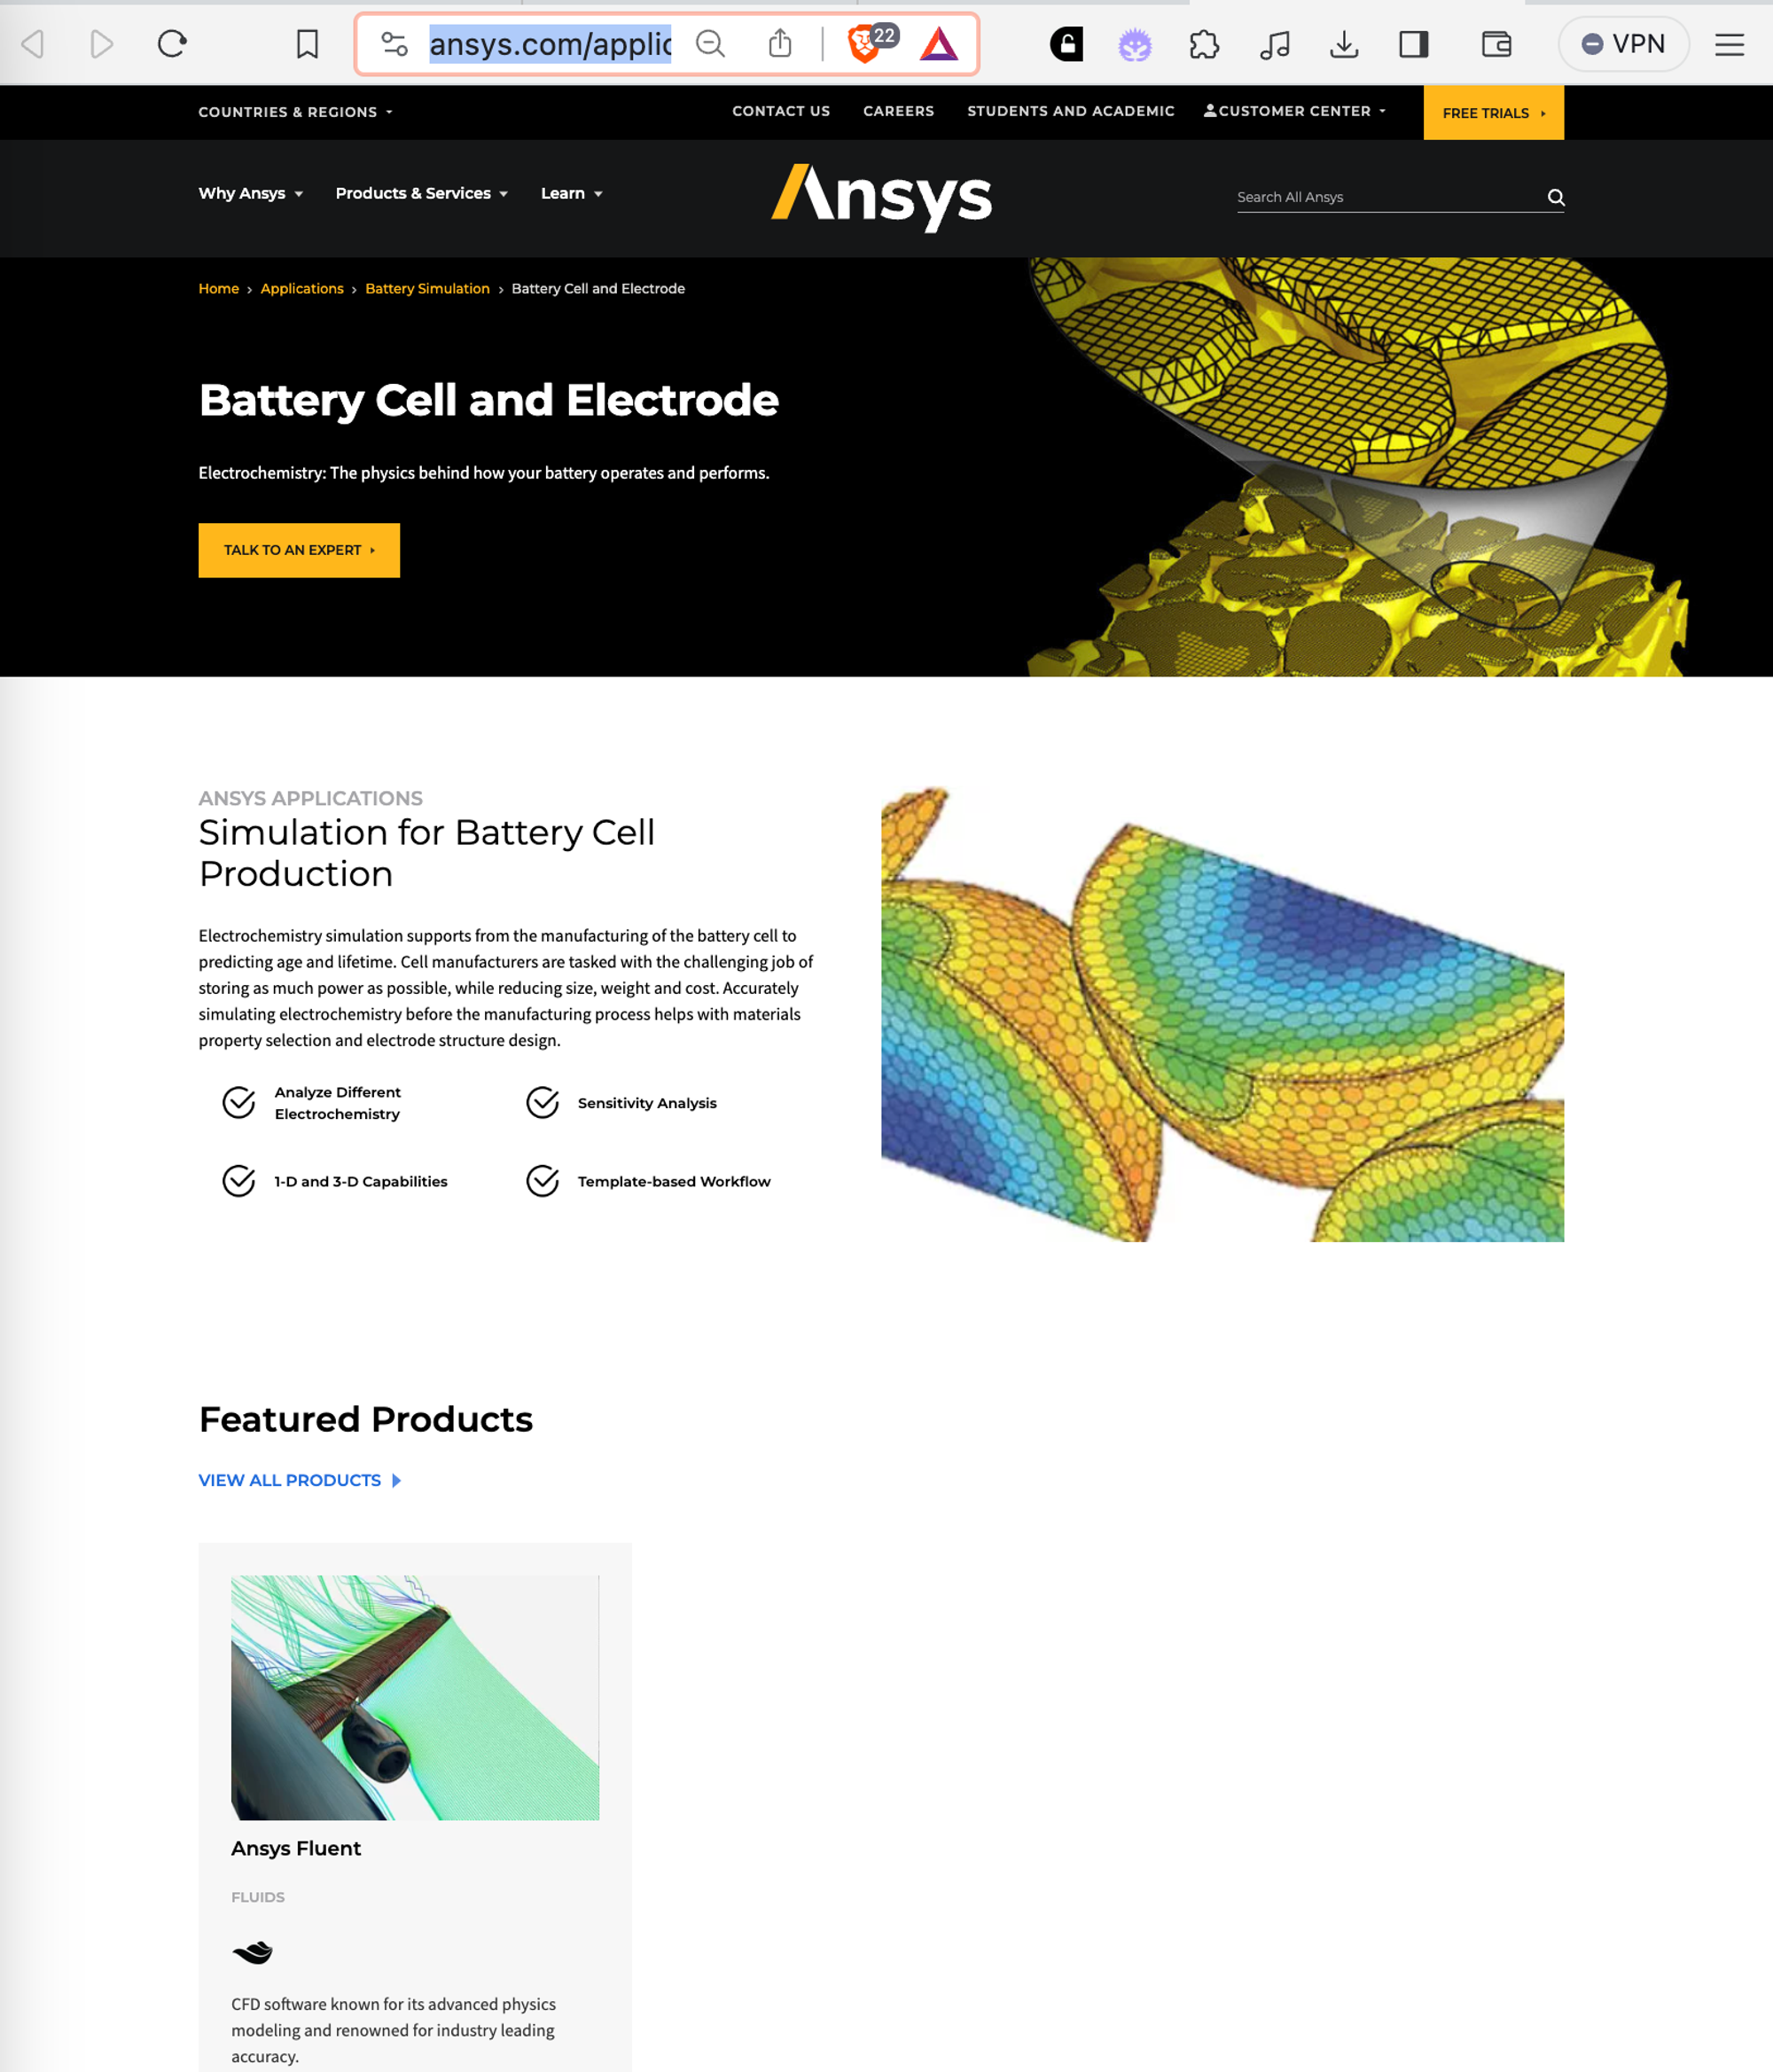 Chemical Simulation with ANSYS